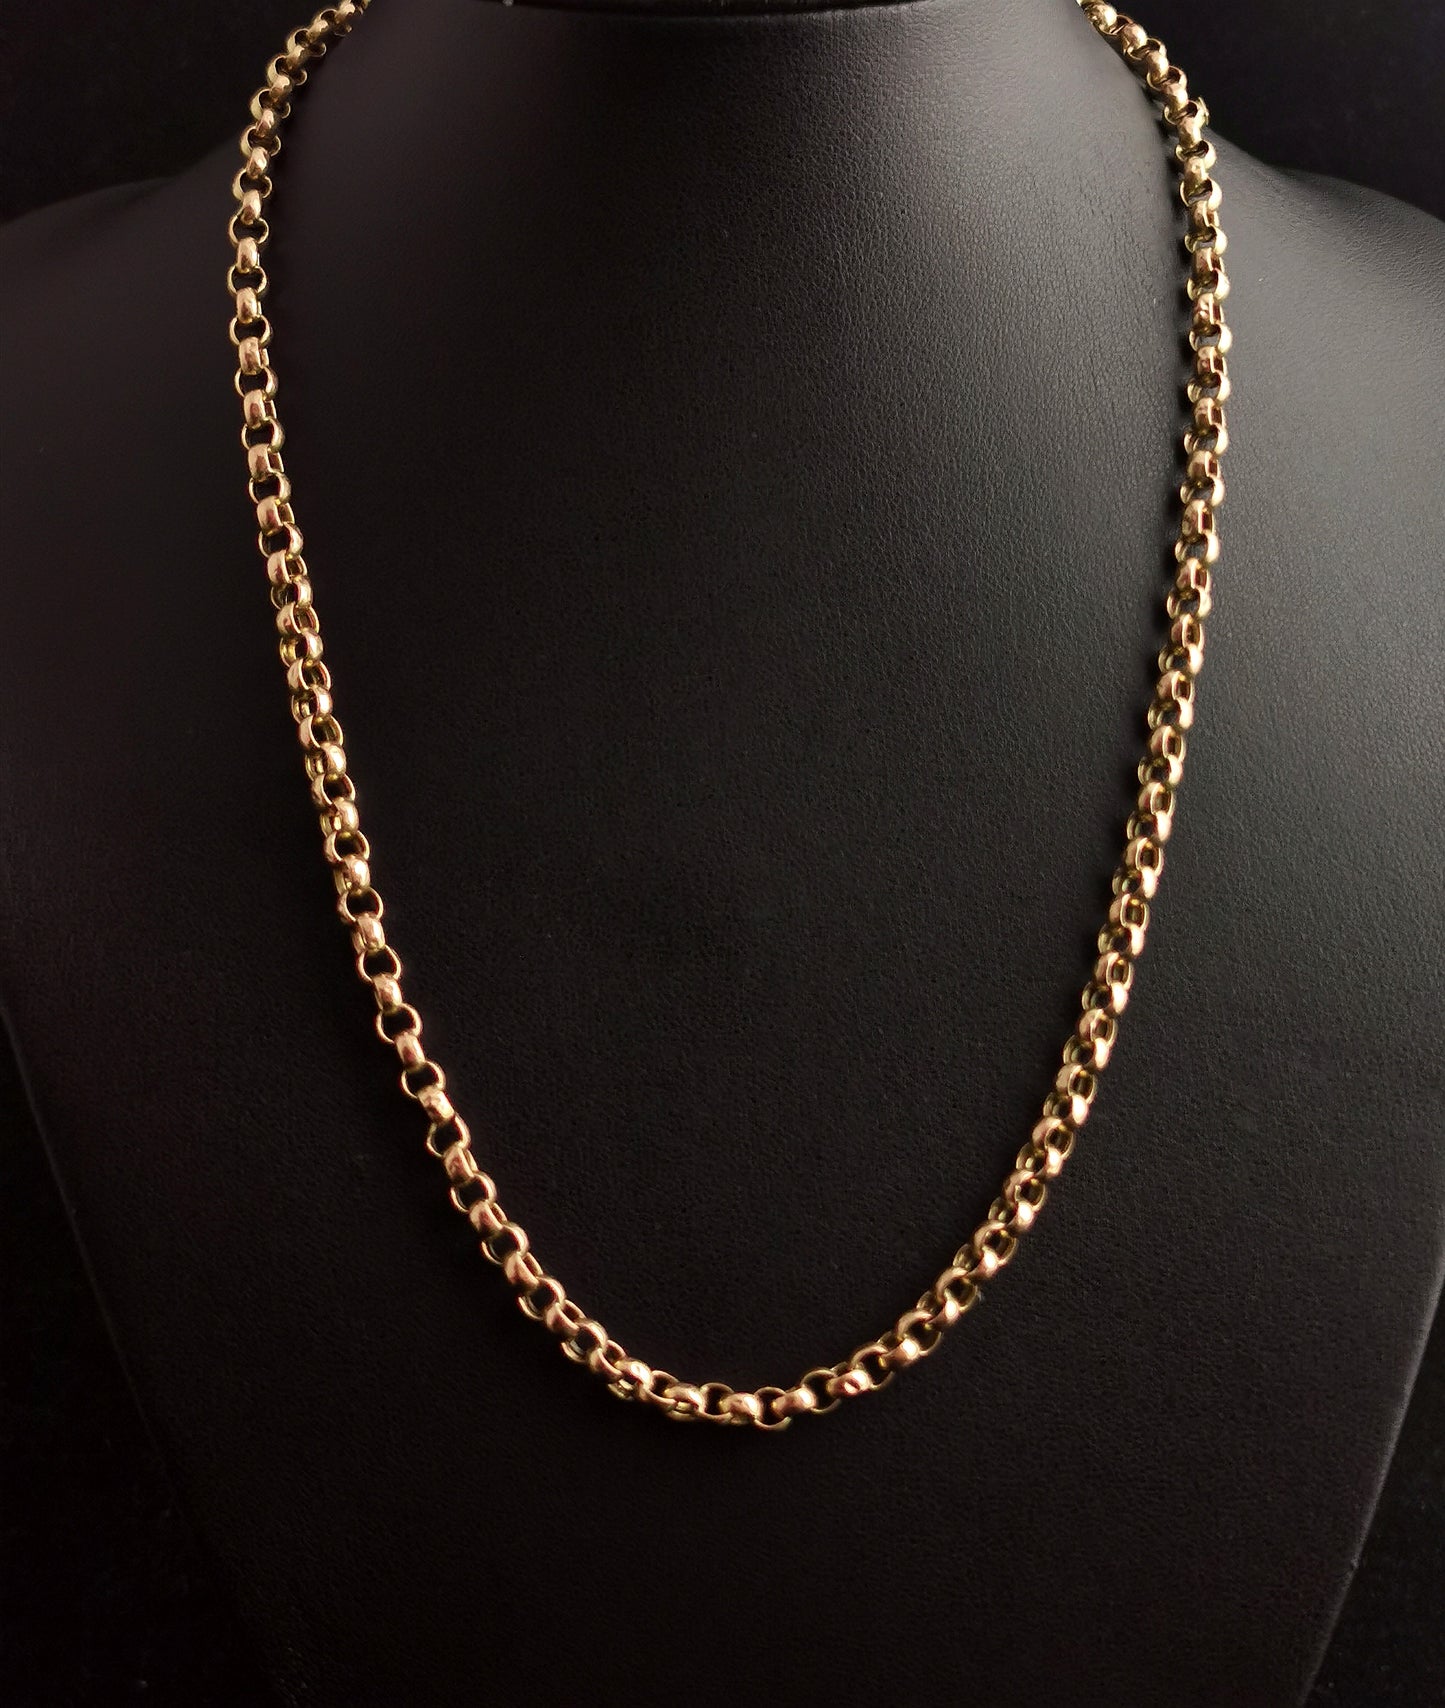 Antique 9ct yellow gold Belcher link chain necklace, rolo link